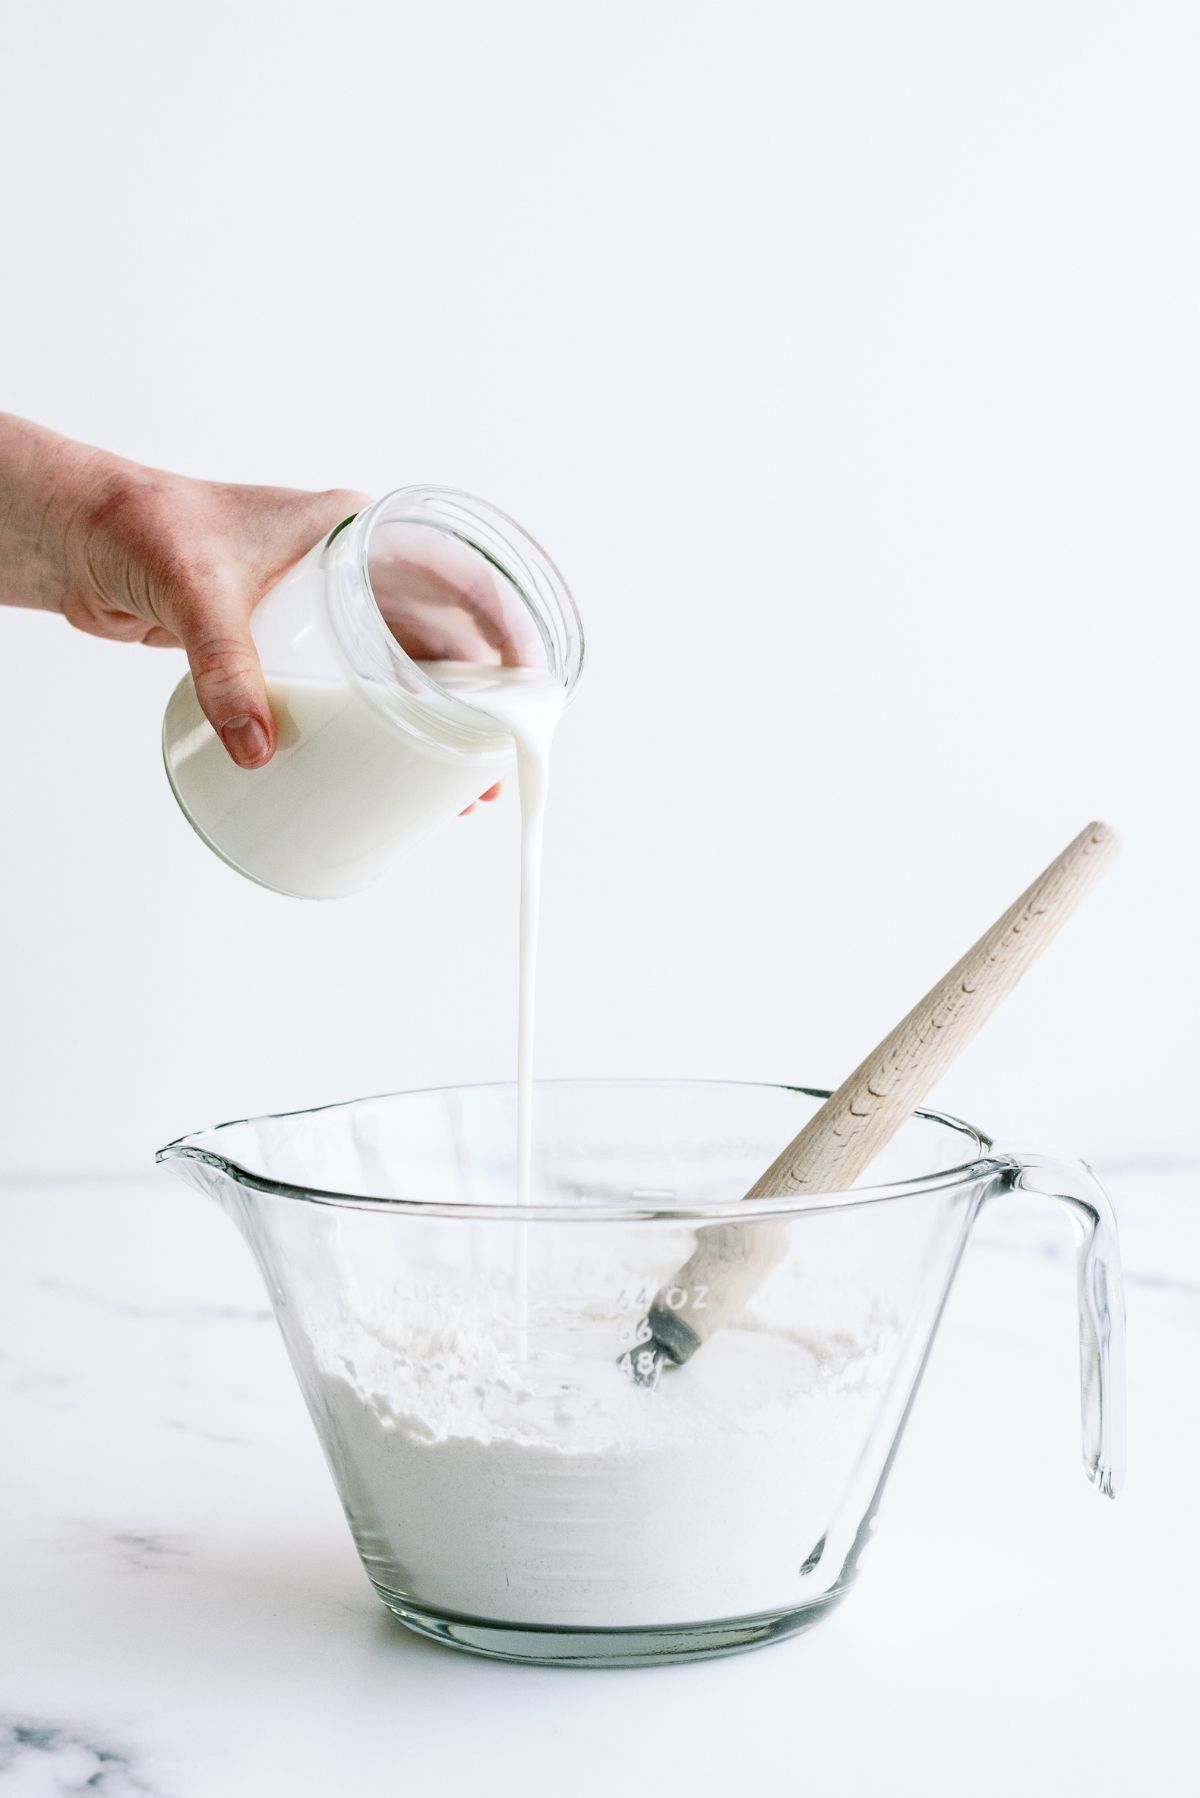 Pouring buttermilk into the dry ingredients